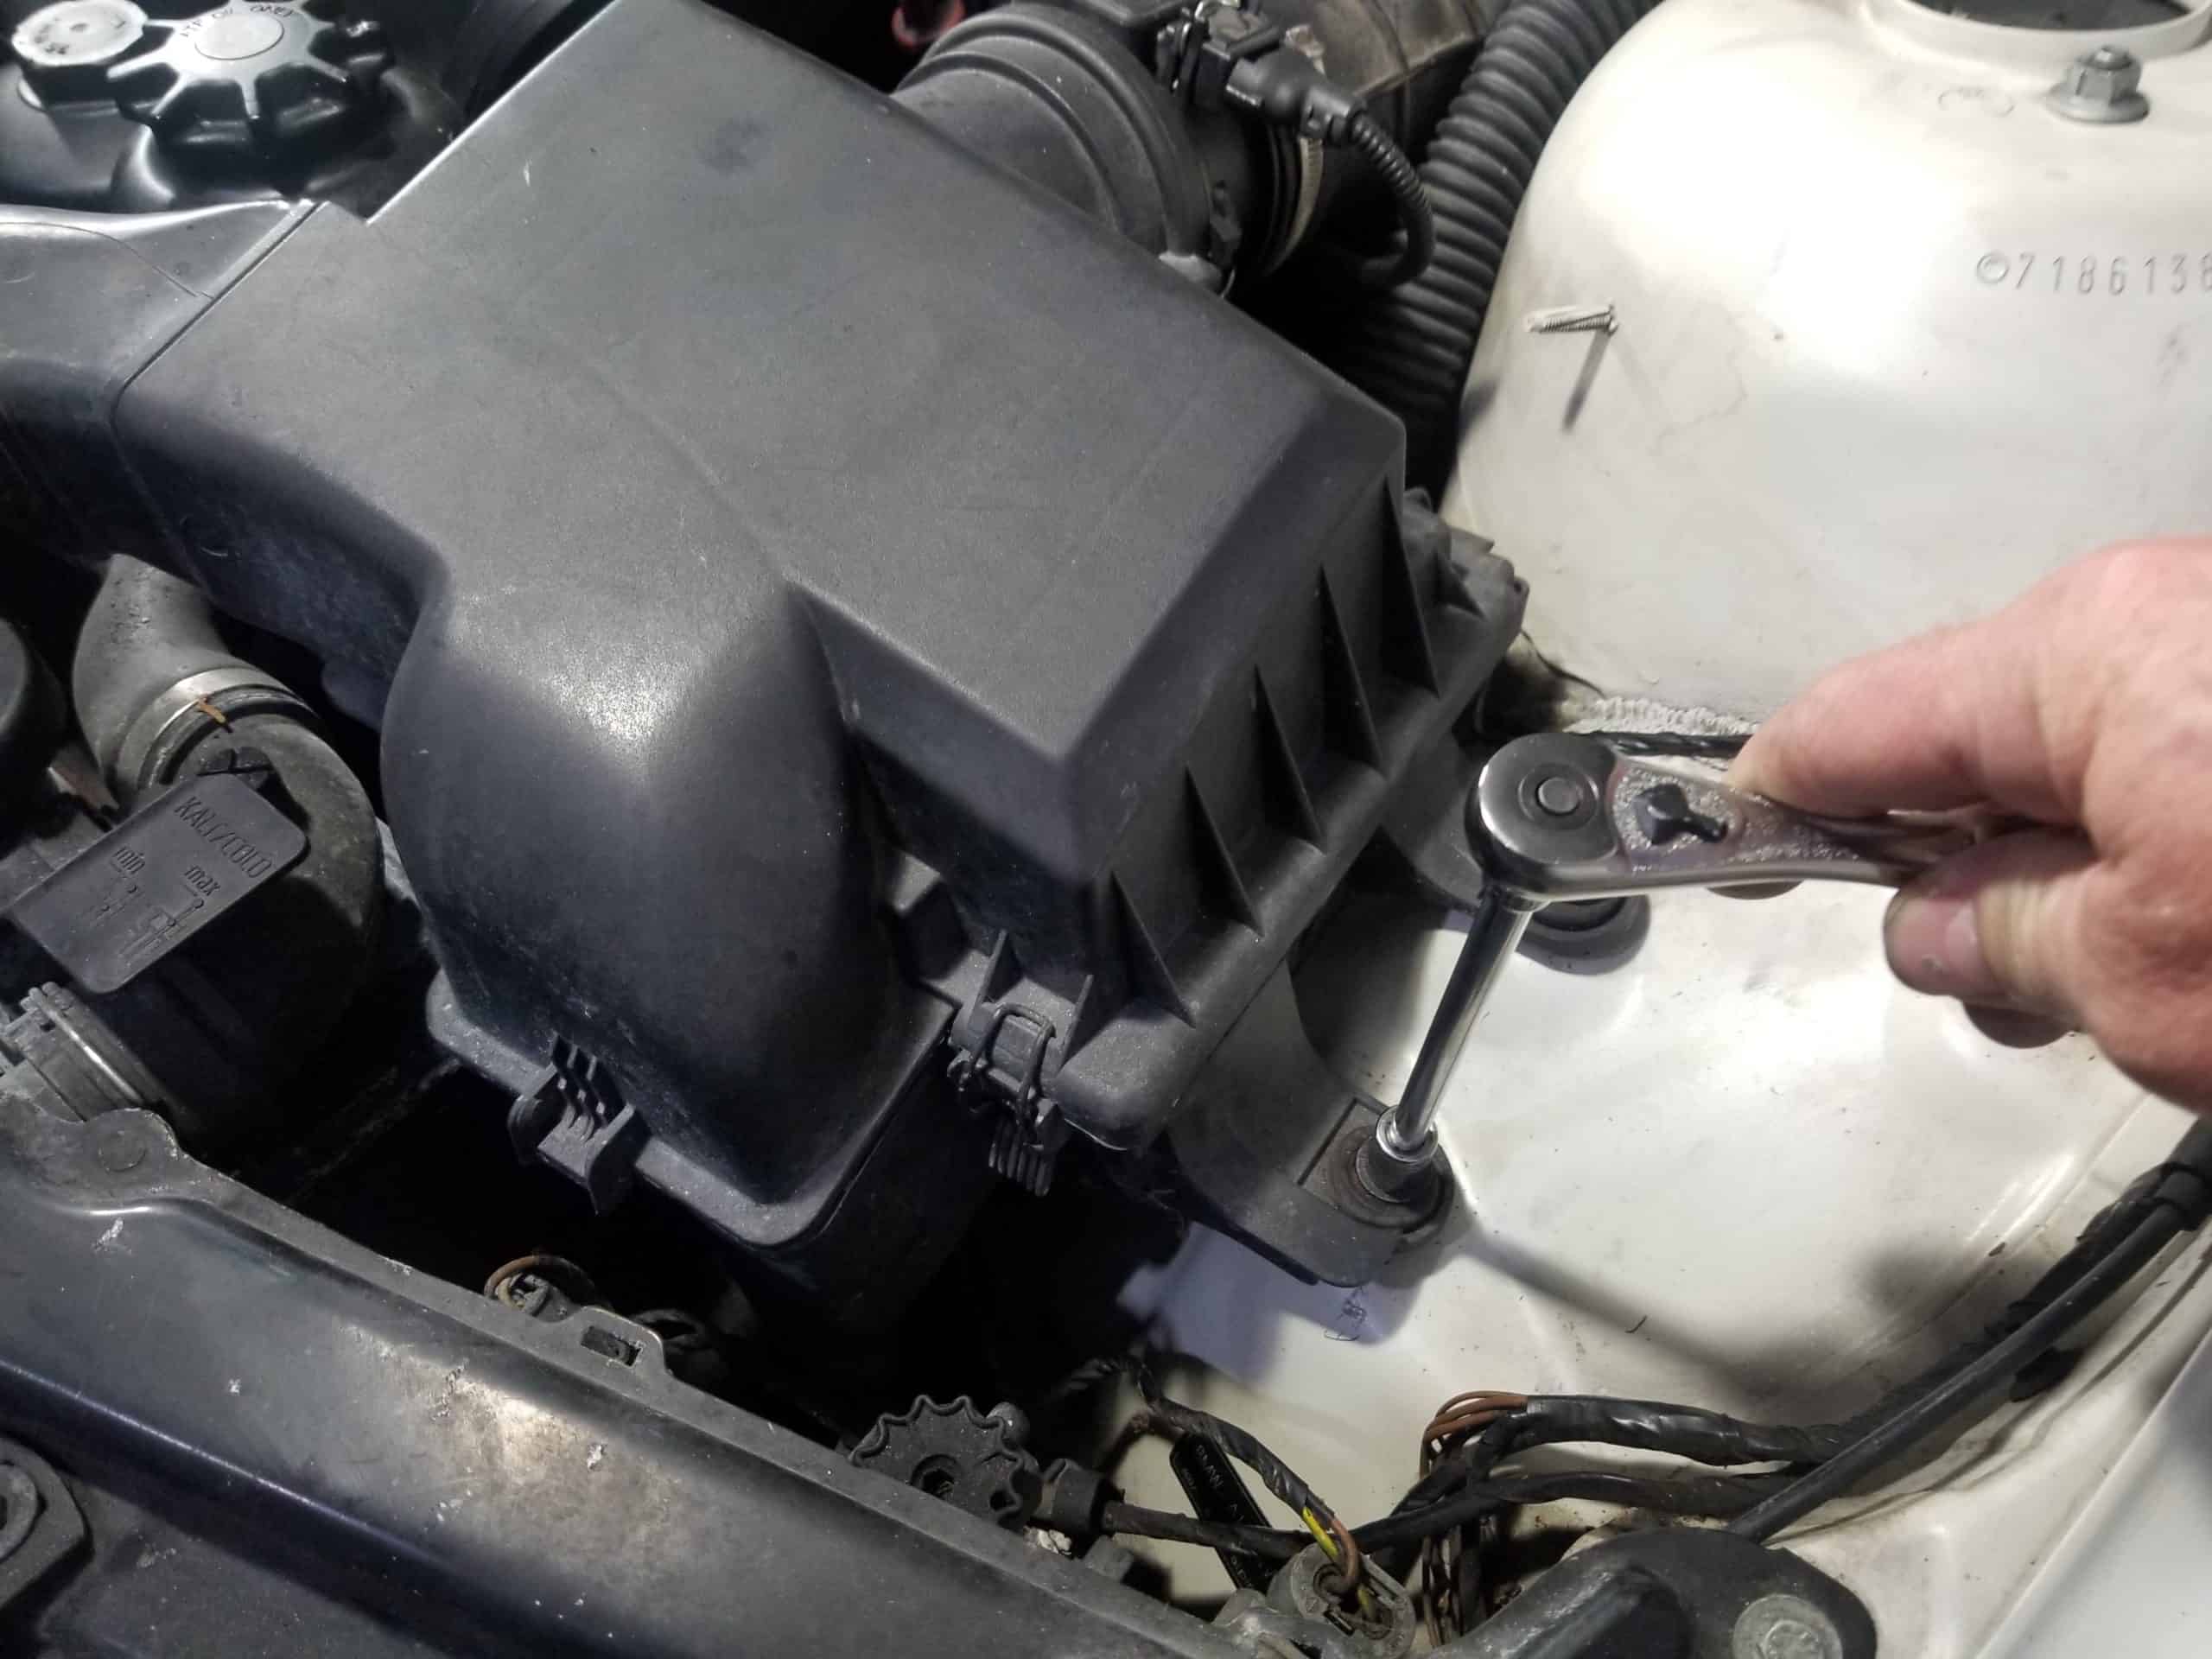 bmw e46 alternator removal - Remove the intake muffler from the vehicle.